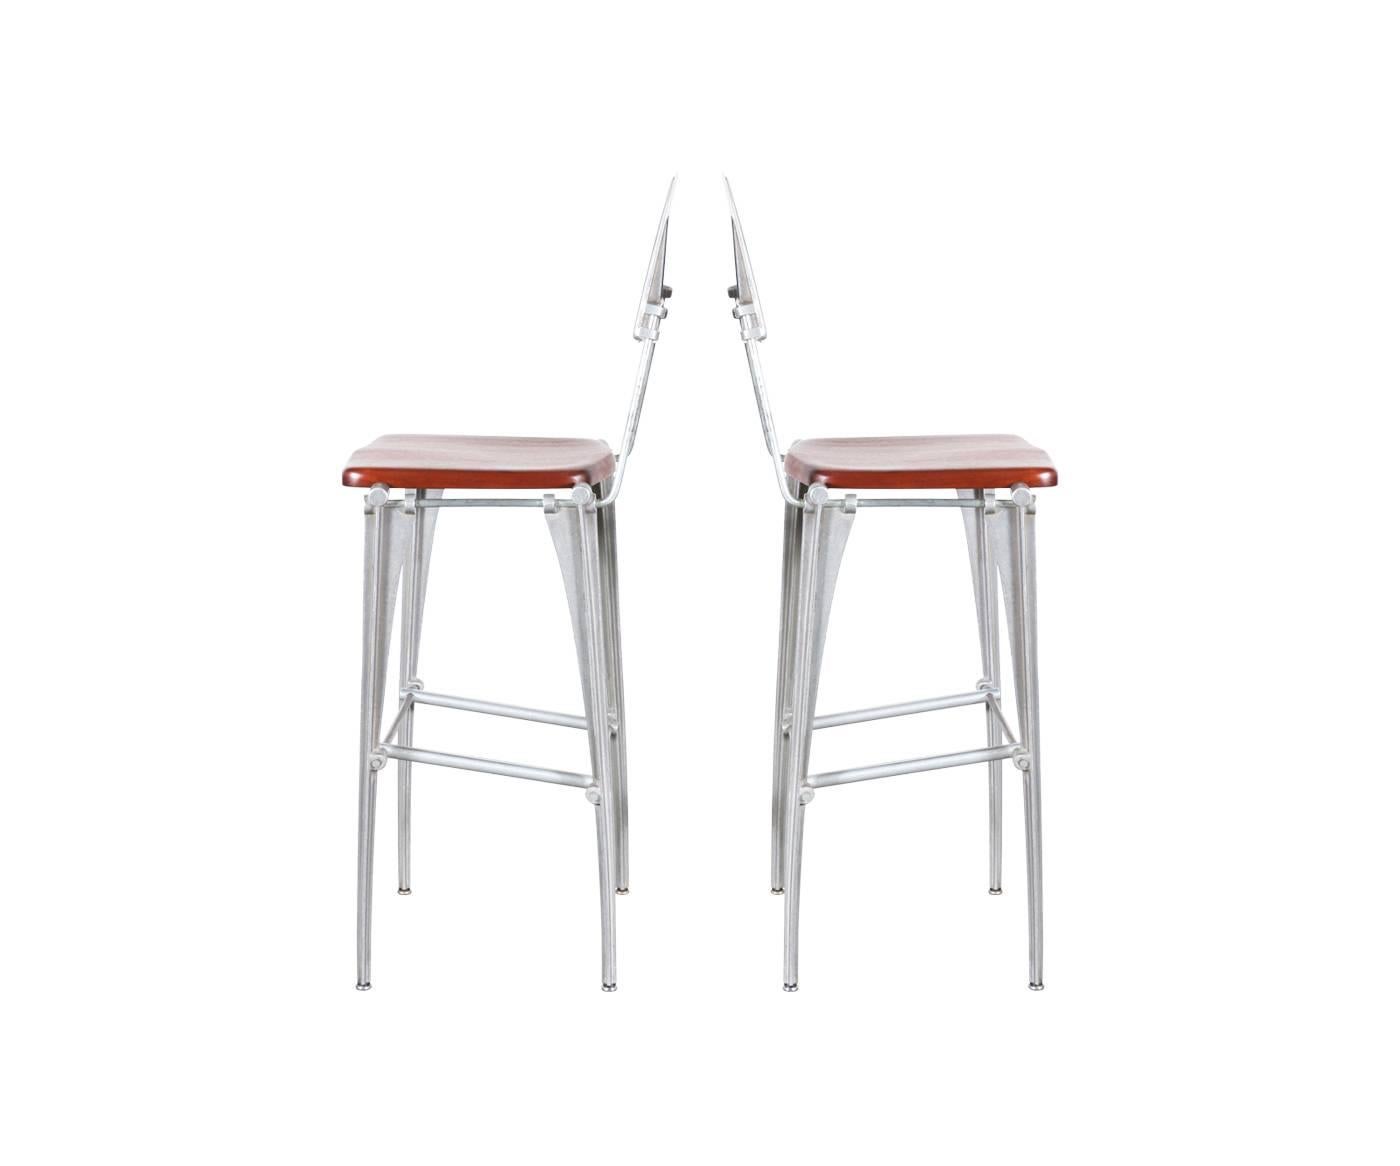 Robert Josten cast aluminum bar stools. Designer: Robert Josten.
Manufacturer: Robert Josten Studio.
Period/style: Mid-Century Modern.
Country: United States.
Date: 1970s.

Dimensions: 47.25″ H x 19″ W x 20″ D.
Seat height: